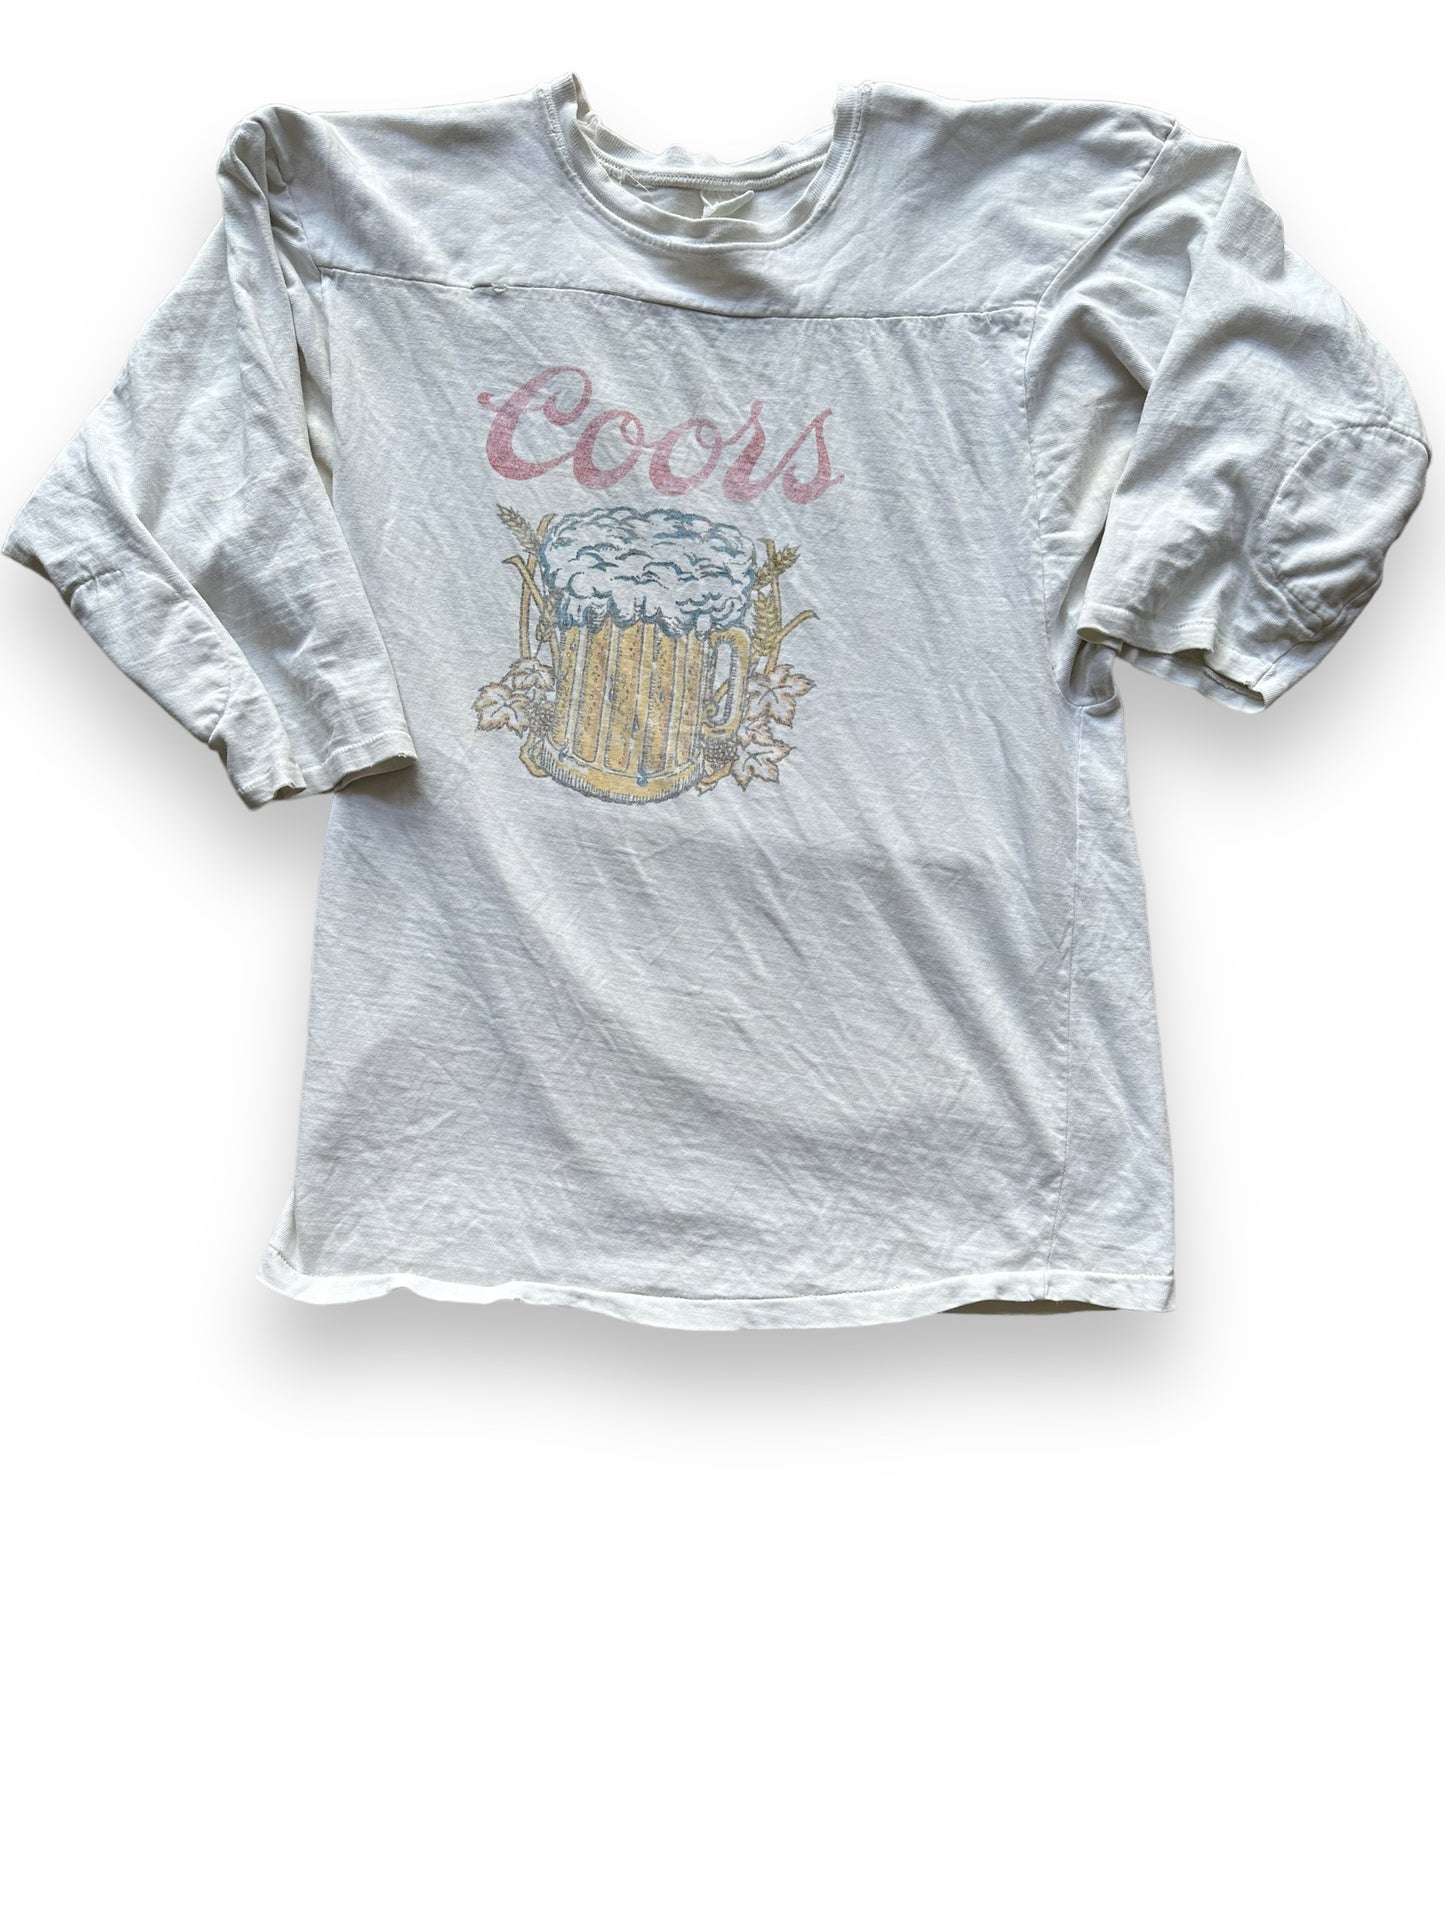 Front View of Vintage Coors Jersey Tee SZ M | Vintage Beer T-Shirts Seattle | Barn Owl Vintage Tees Seattle